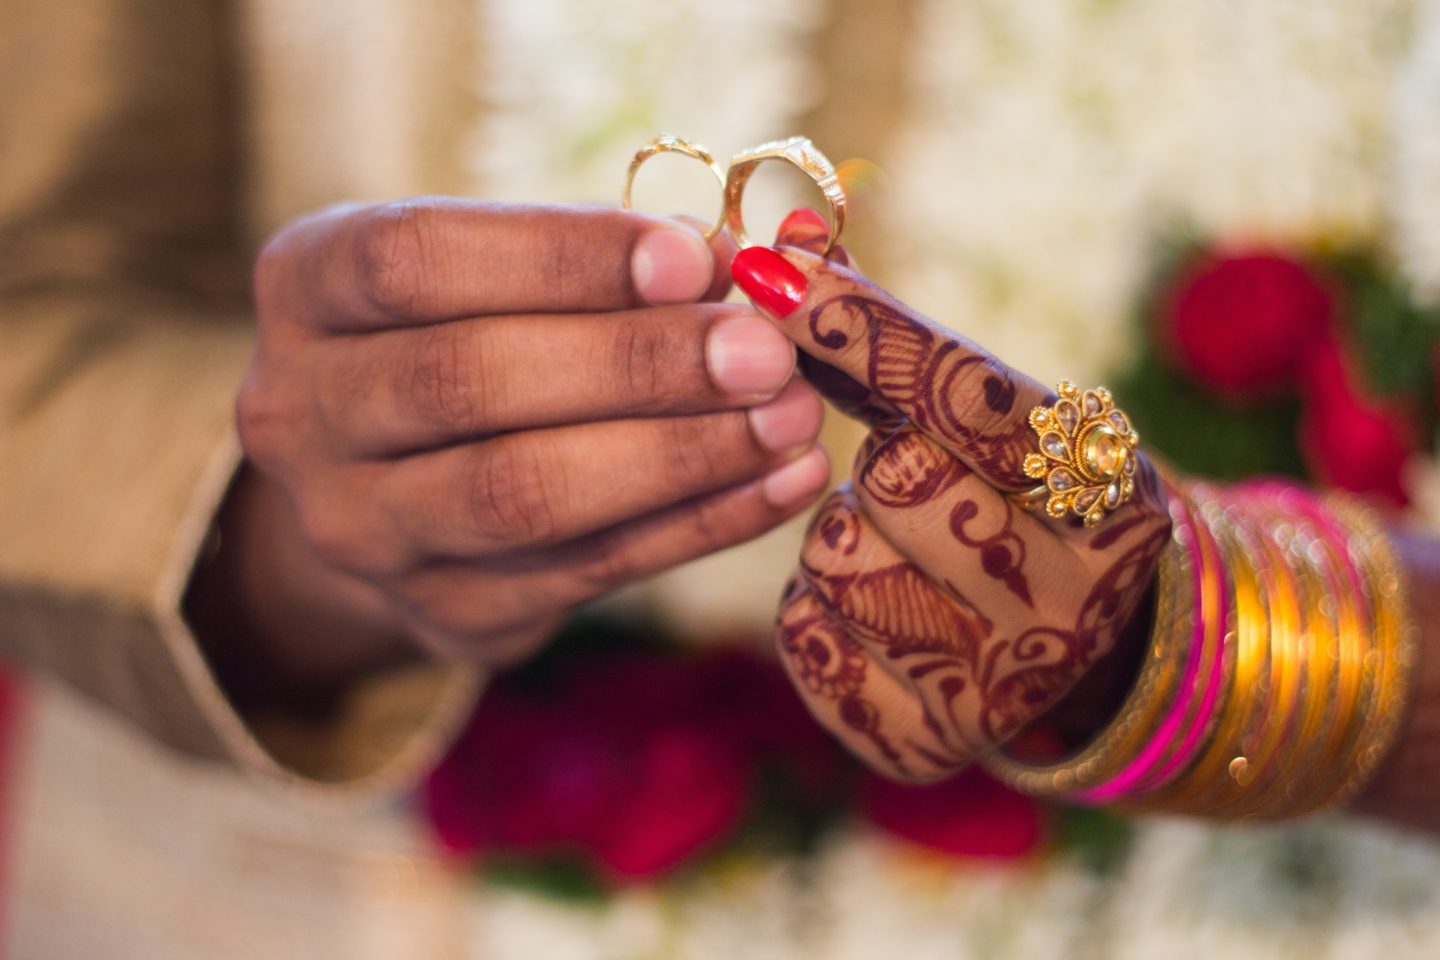  7 Lies You're Told When Planning Your Wedding